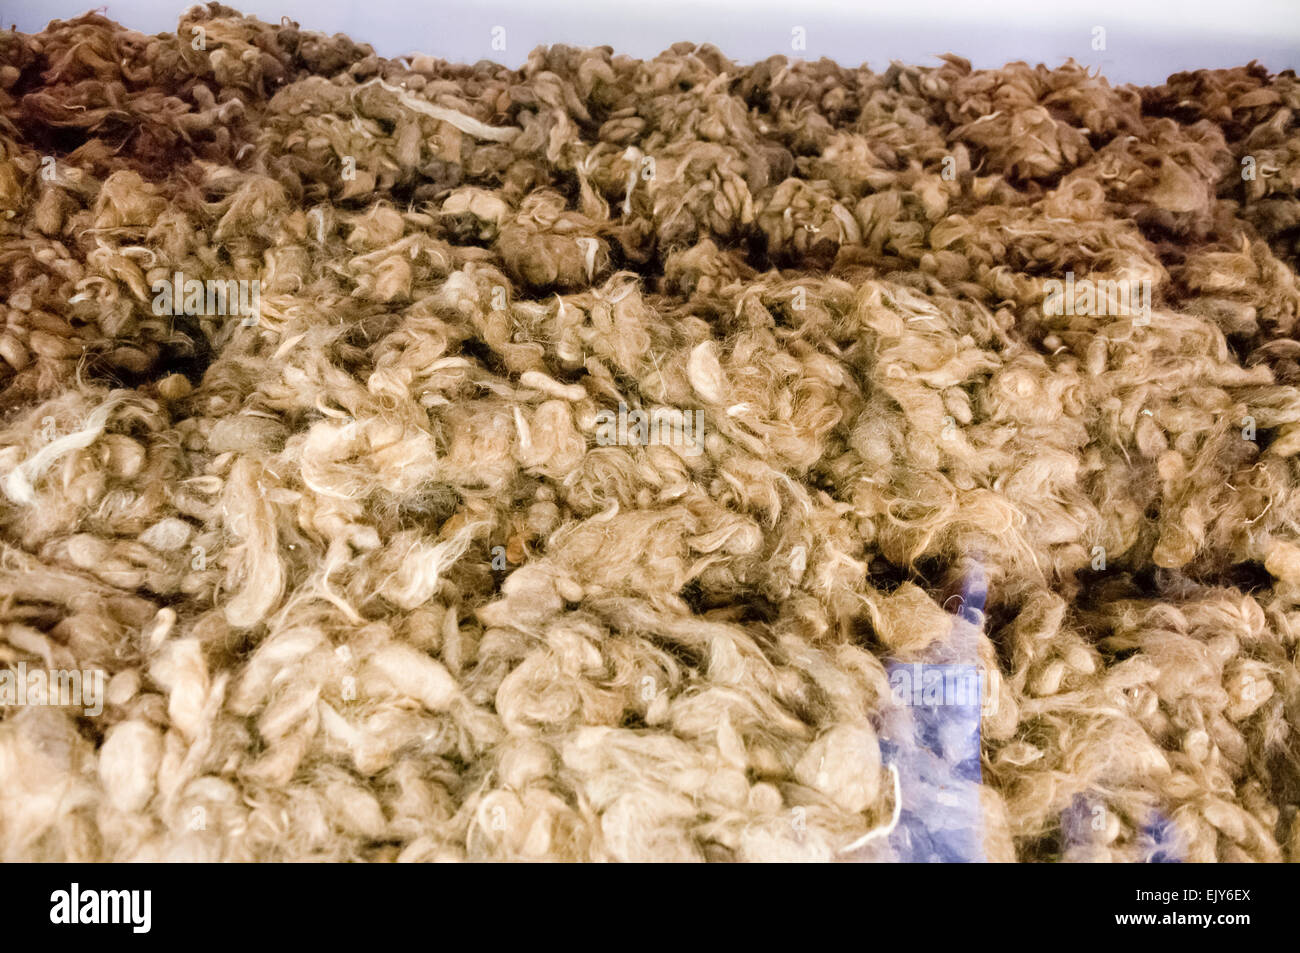 Pile of hair cut from jewish women at Auschwitz, Poland. Stock Photo